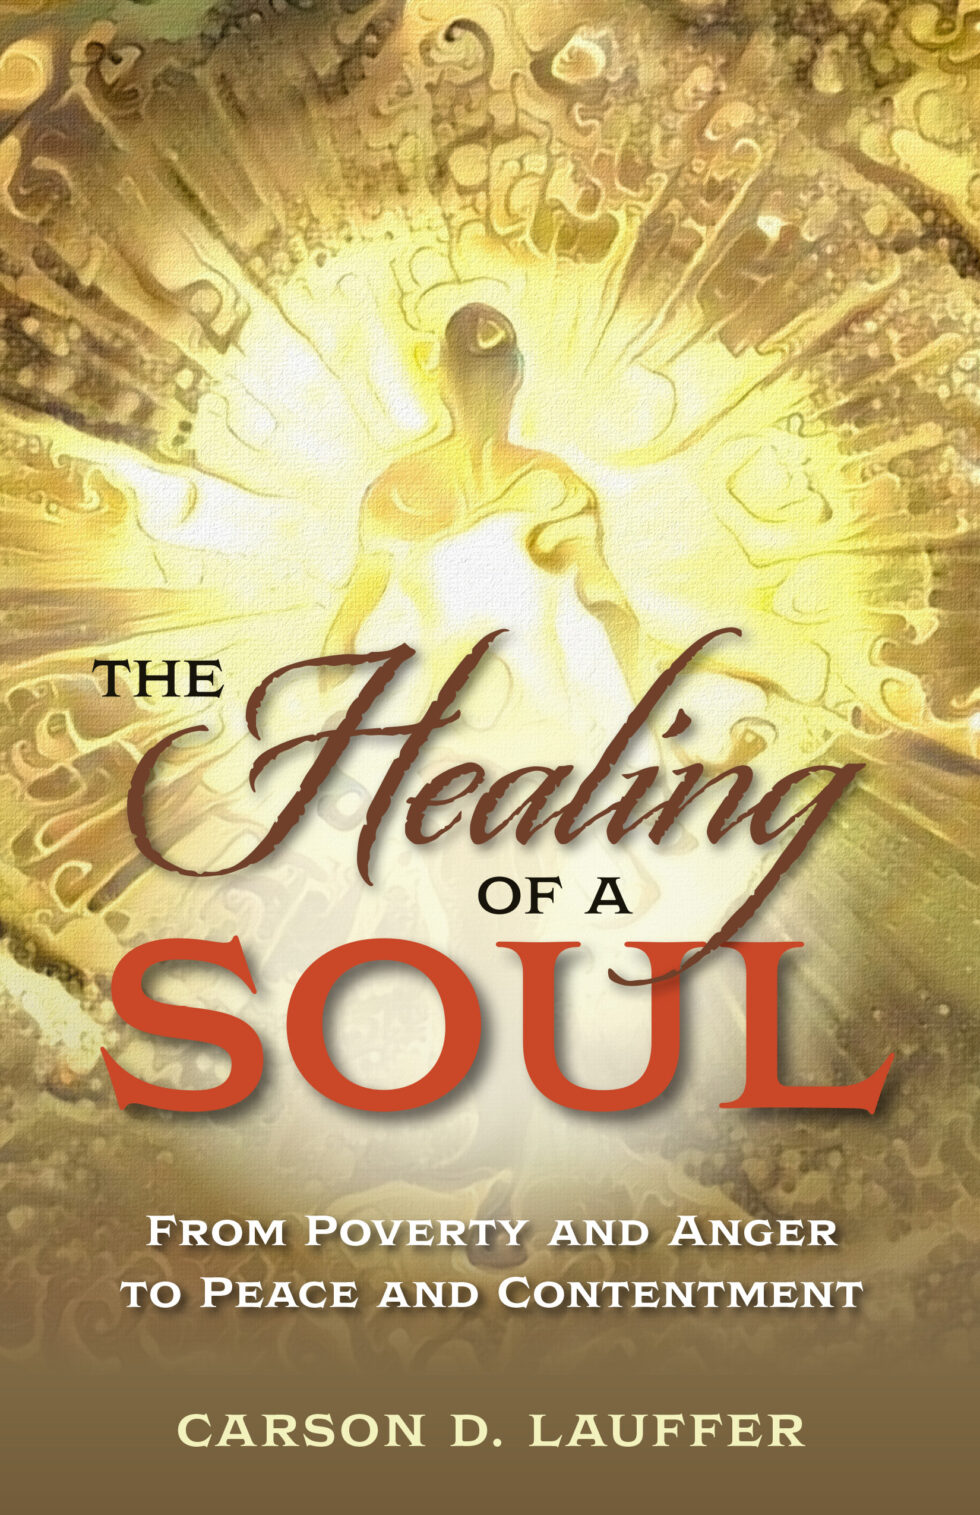 The Healing of a Soul